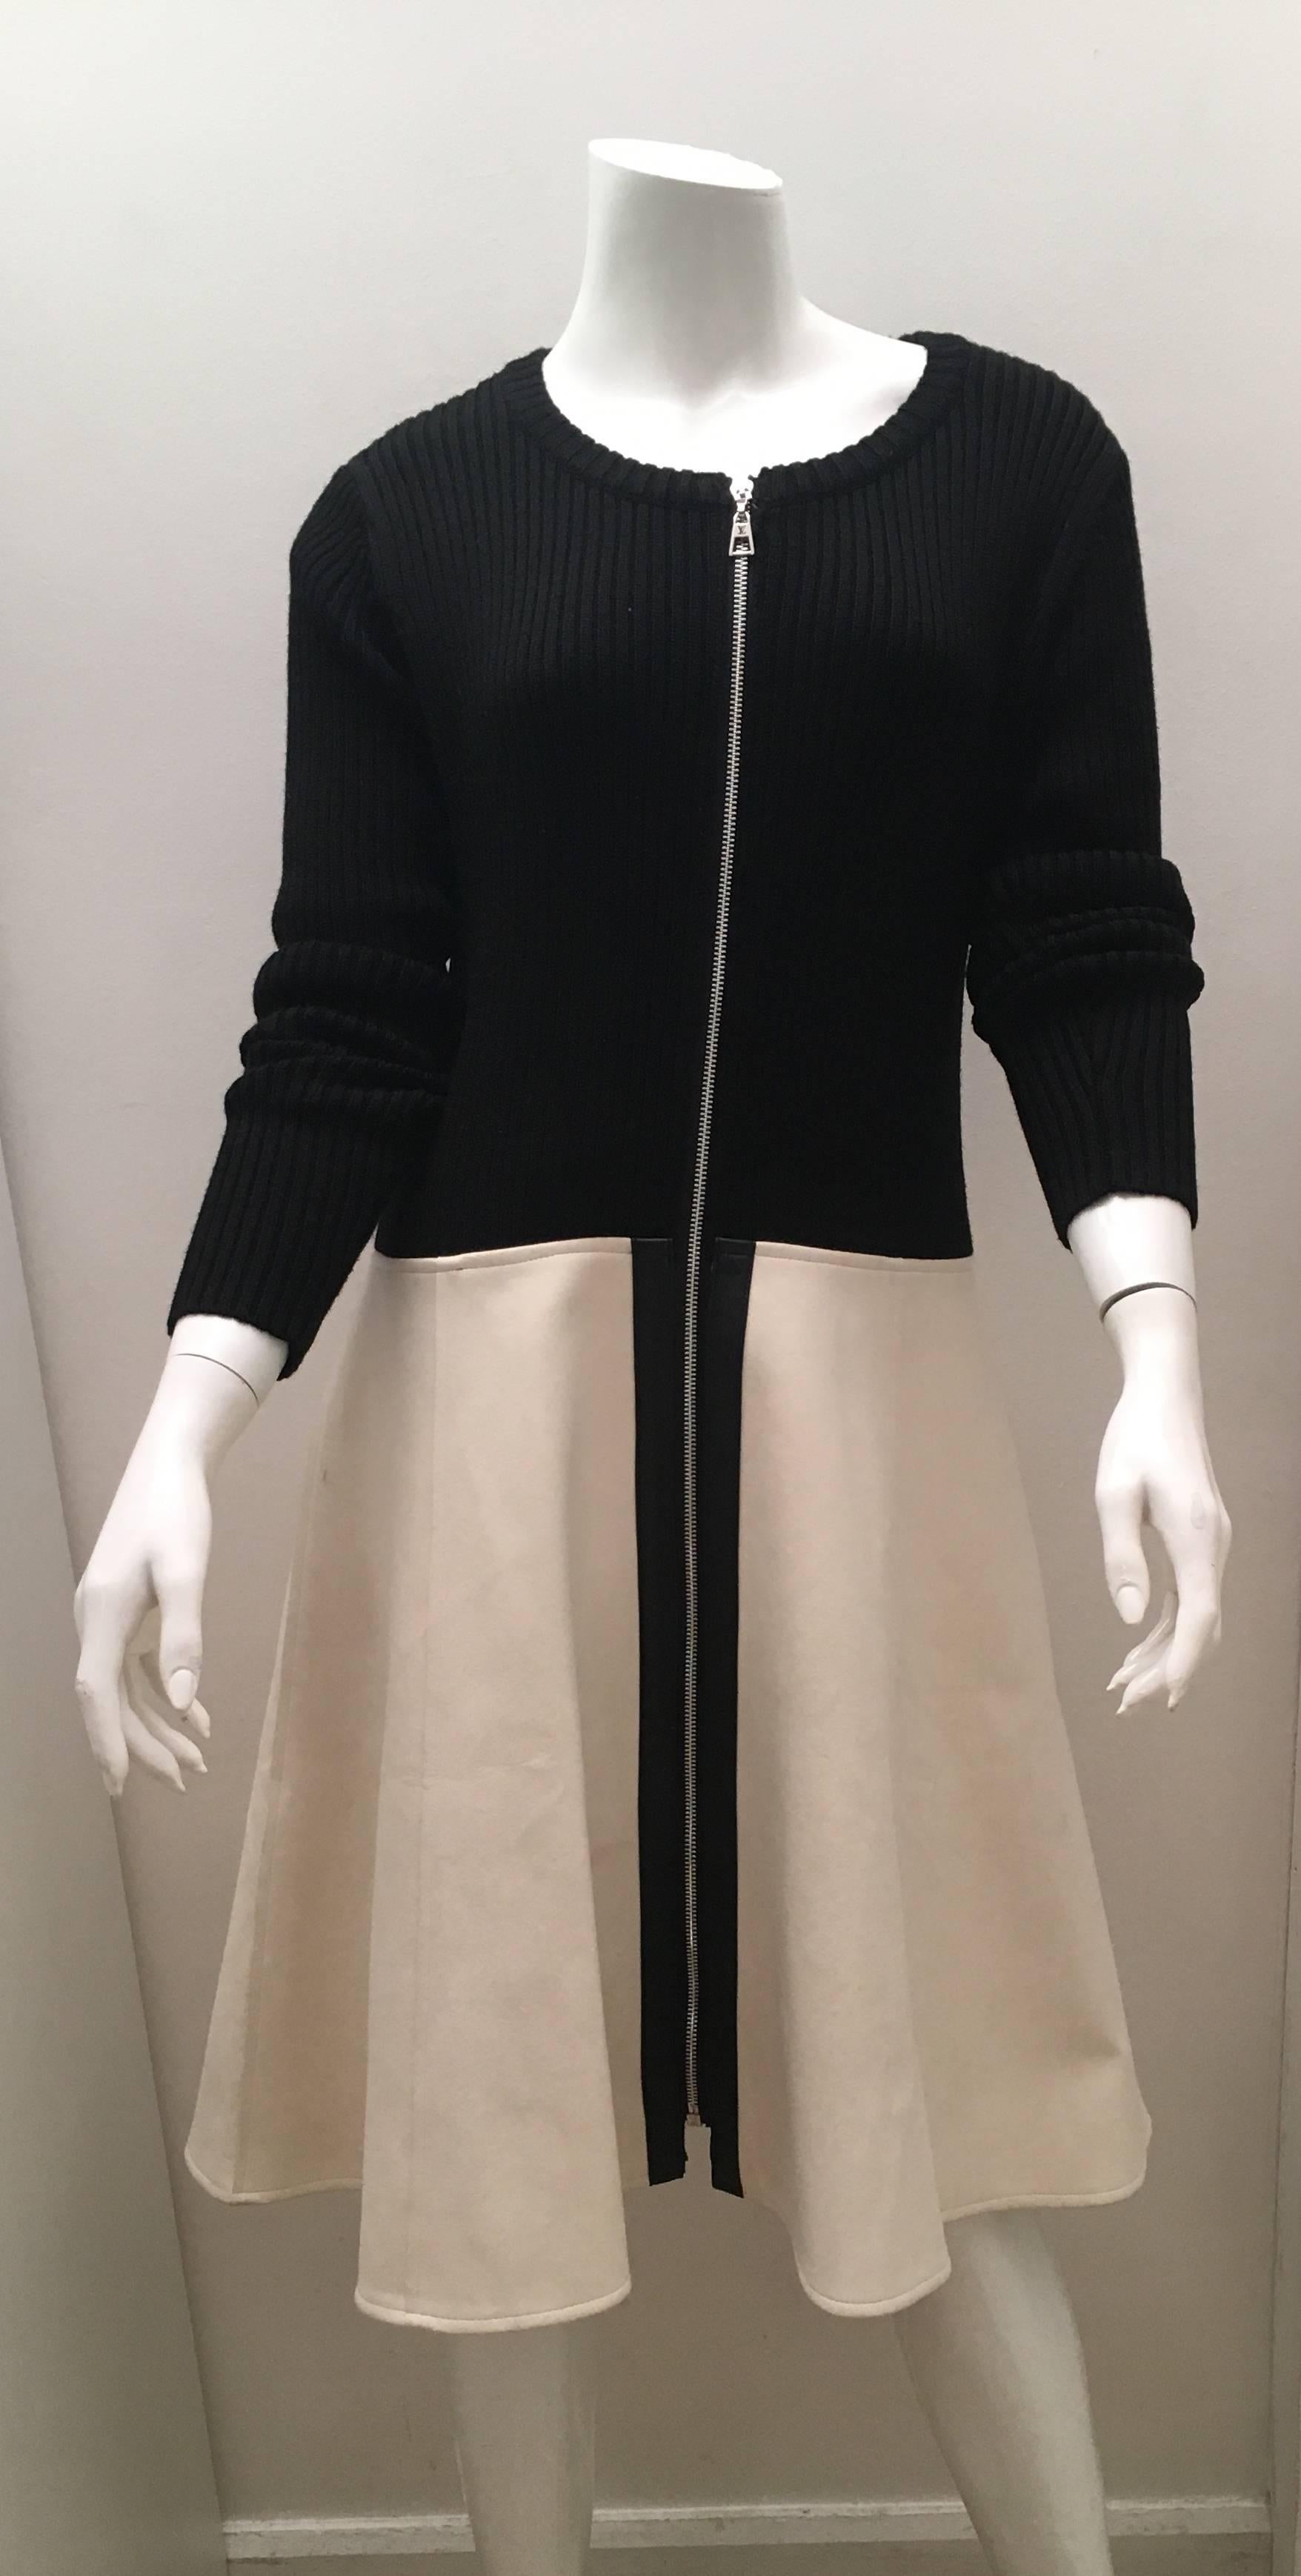 Louis Vuitton Dress Black and White Runway For Sale 3